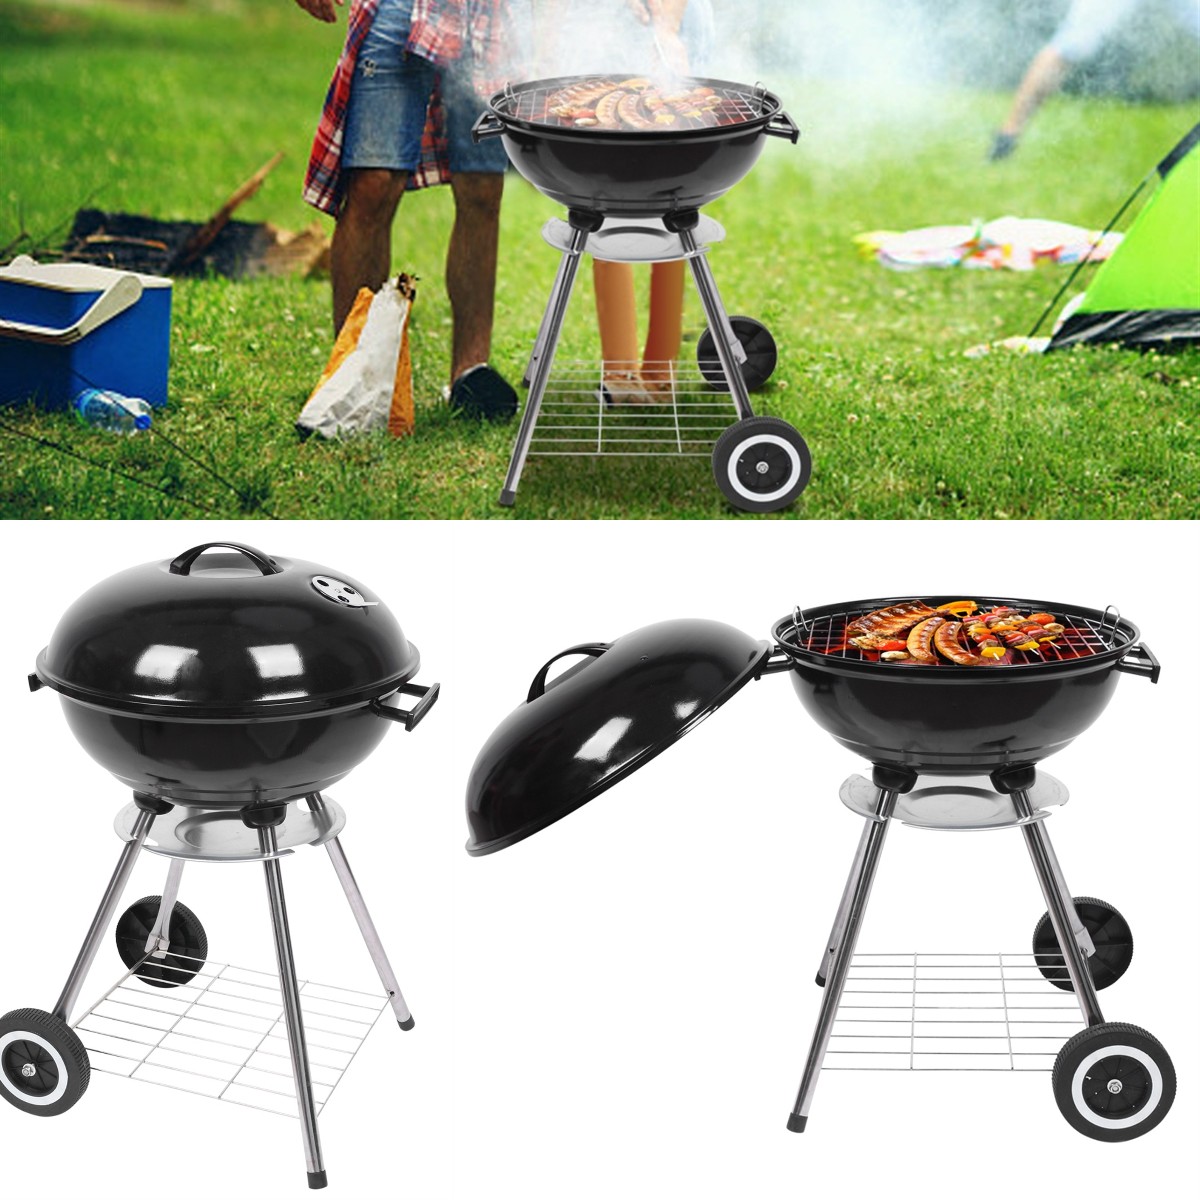 Goorabbit Portable Charcoal Barbecue Grill, 18" Portable BBQ Charcoal Grill with Bottom Shelf, Cooking Grate Grill w/ Metal Grate, Outdoor Charcoal Grill with 2 wheels for Patio, Picnic,Black - image 1 of 14